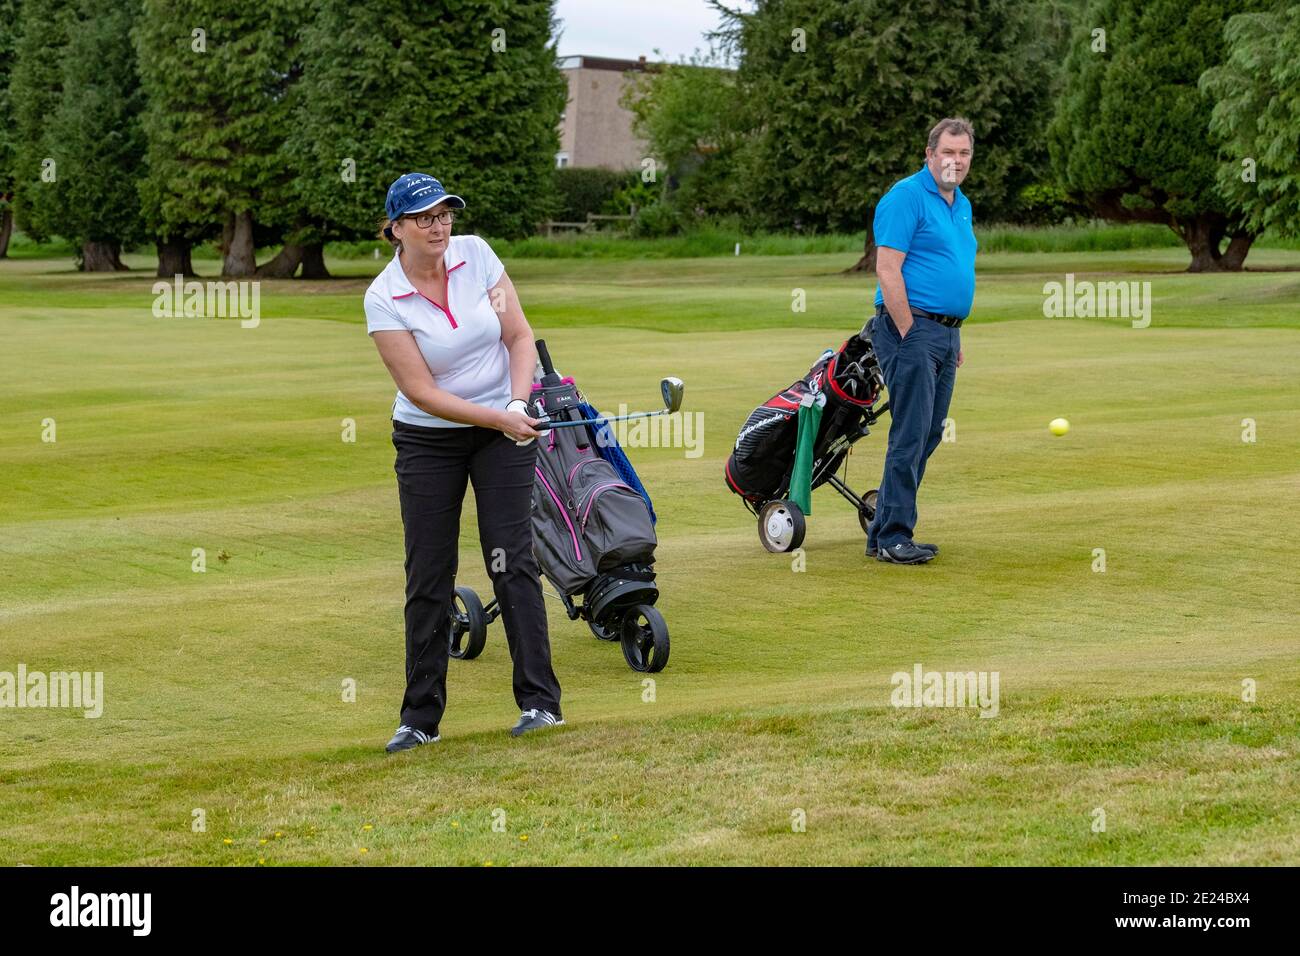 people leisurely playing golf Stock Photo